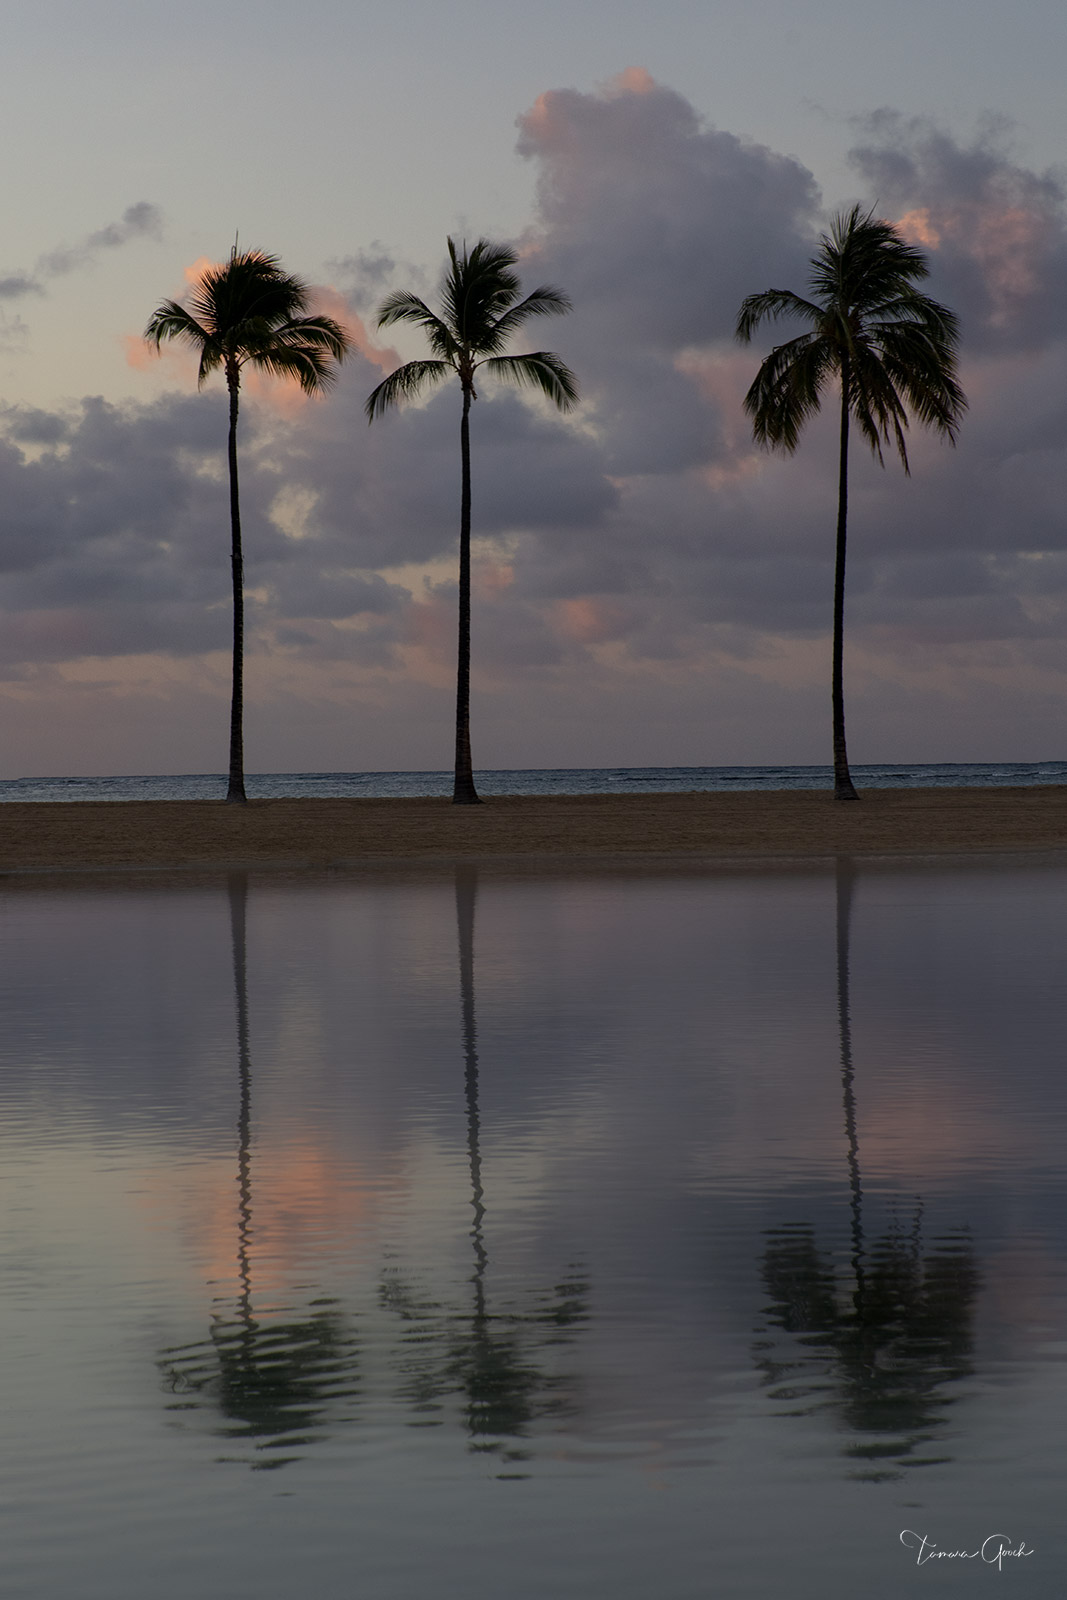 The beautiful photo "Three Palm Trees" was photographed on the island of Hawaii as morning thunder clouds rolled by. A stunning...